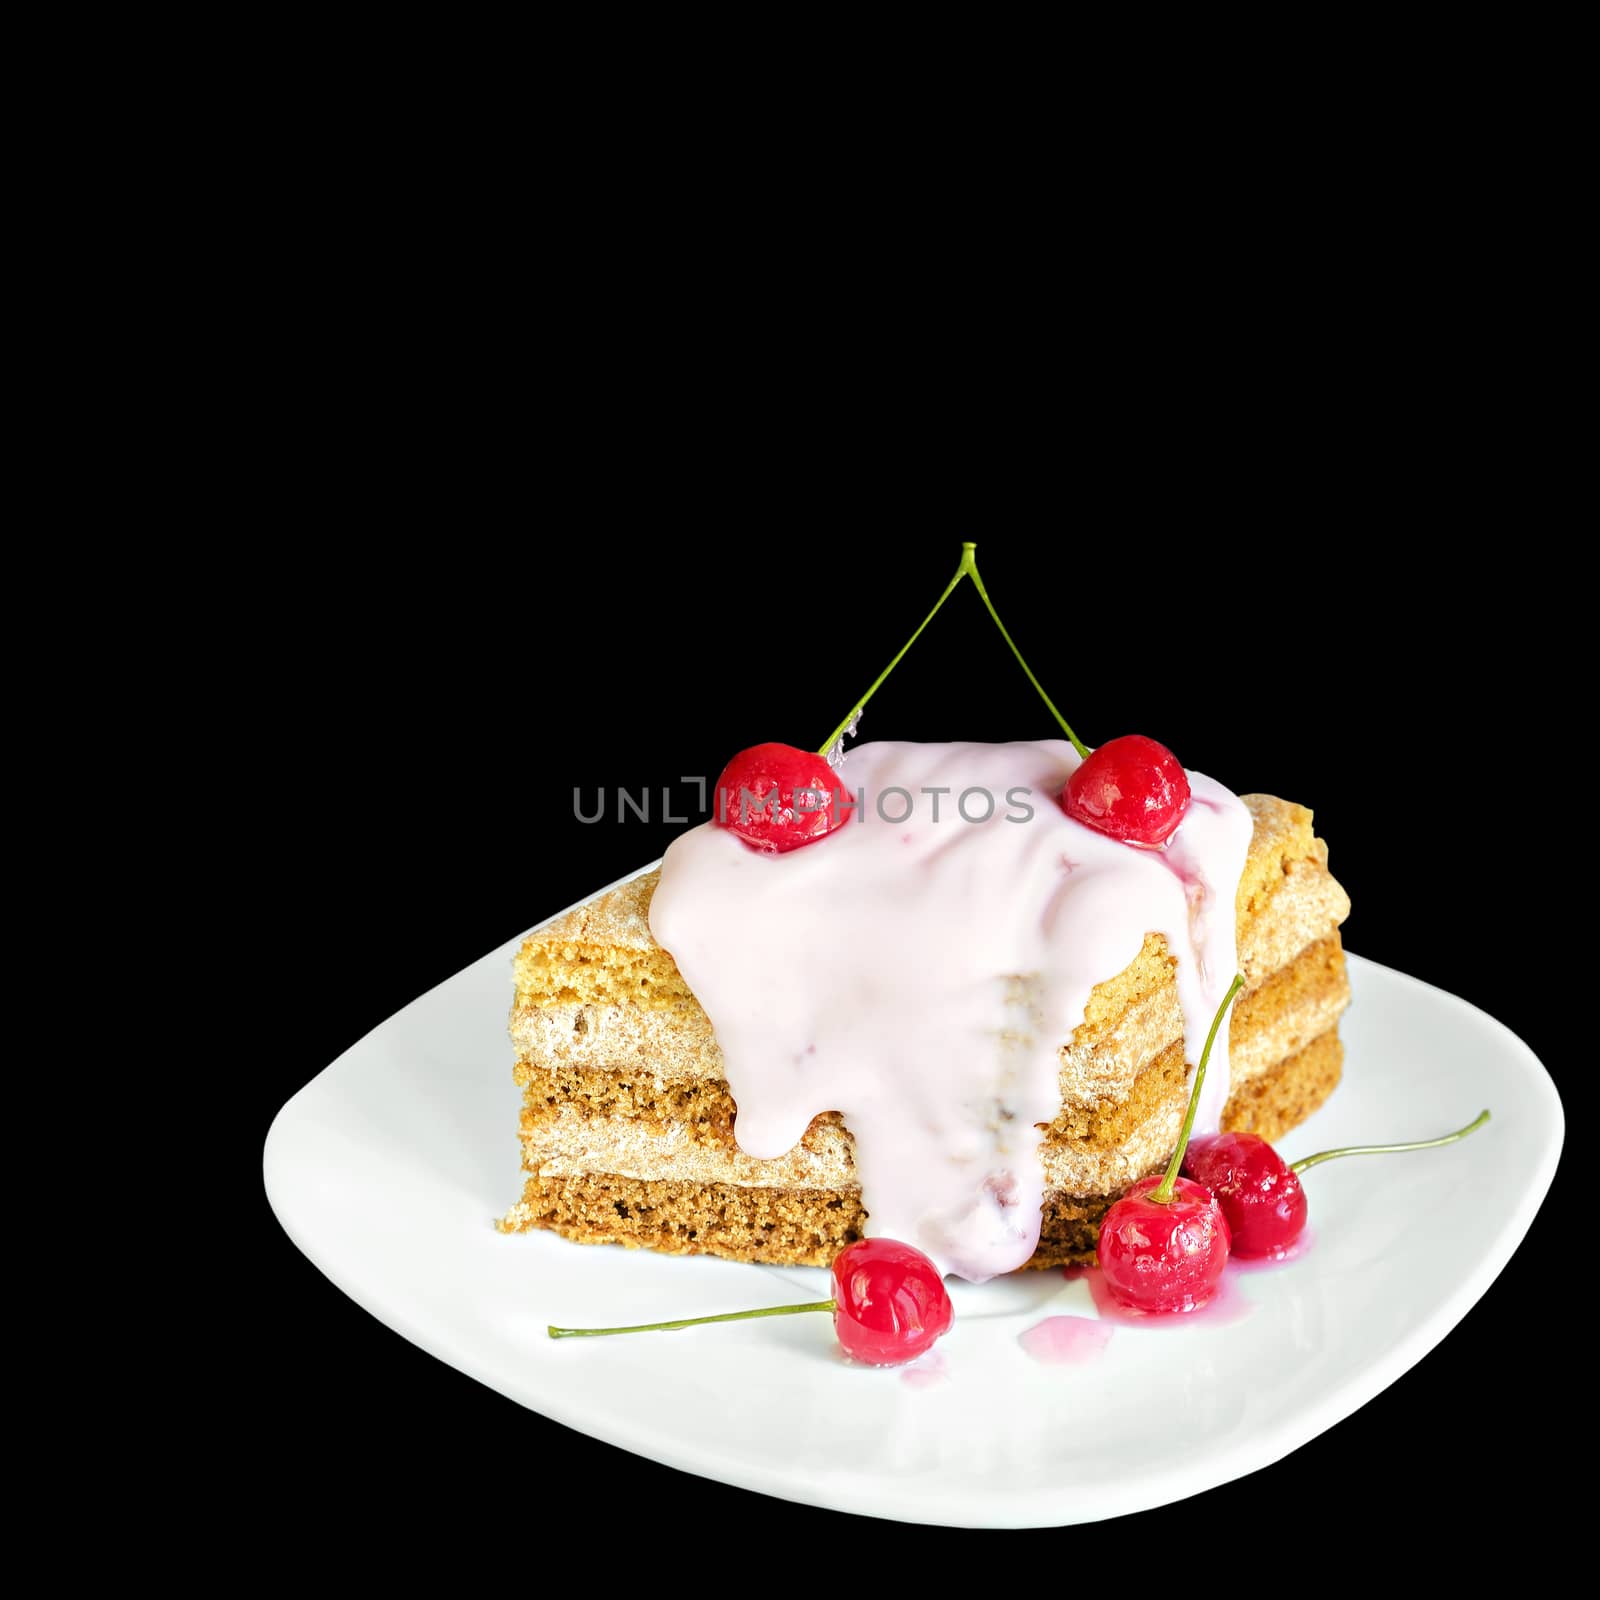 Piece of cake with cherries and yogurt on a plate, isolated on black background